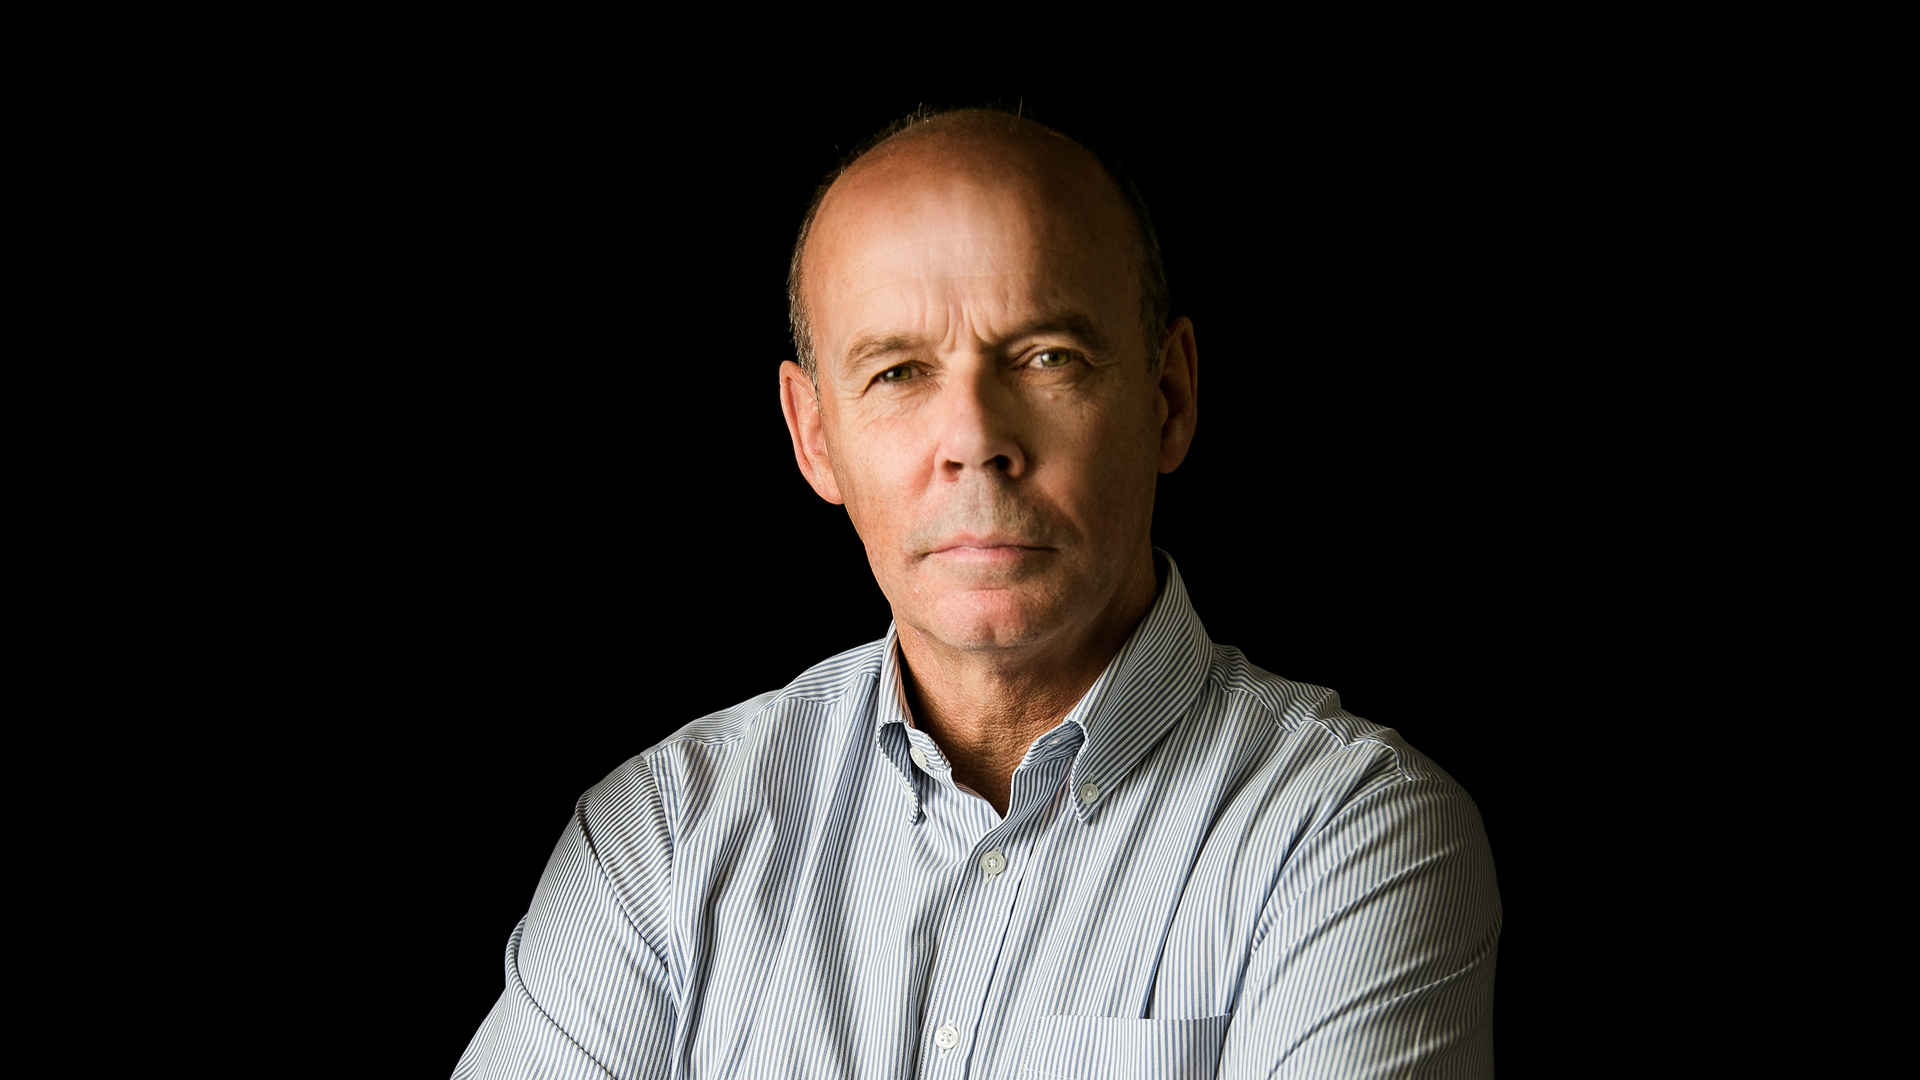 England Rugby Legend, Sir Clive Woodward joins The Recruitment Network